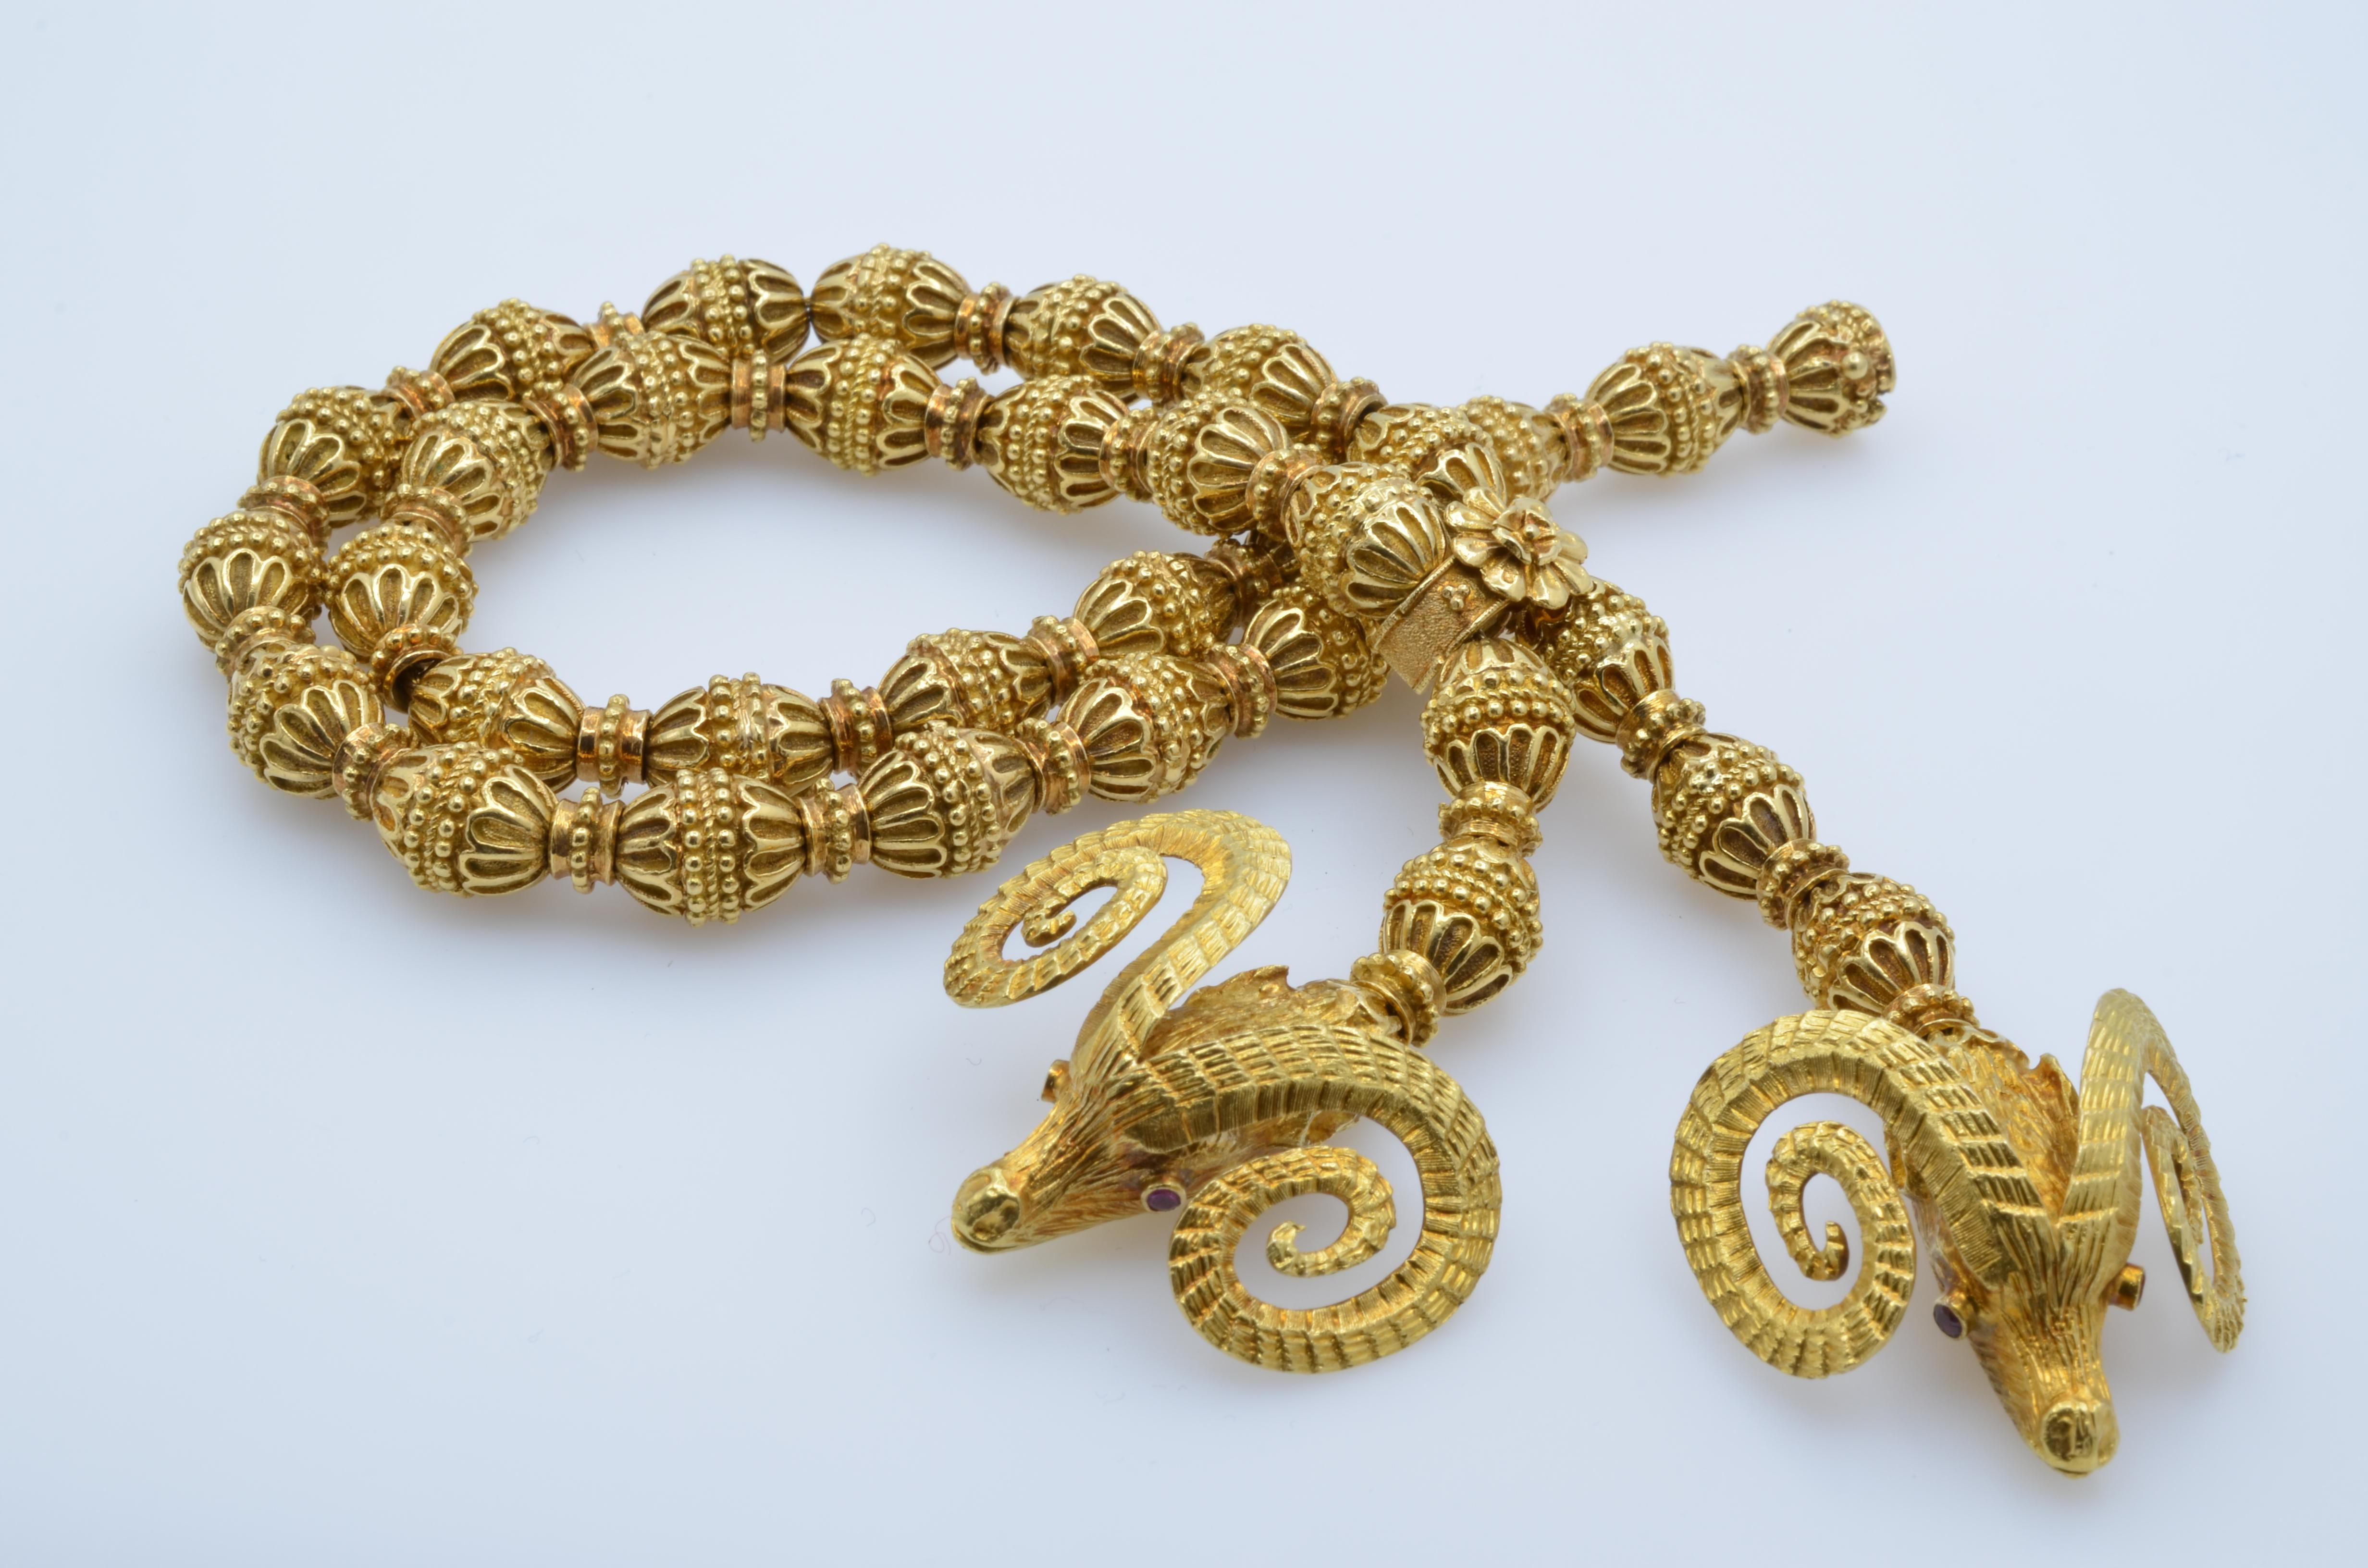 Greek Revival Lalaounis Two Horn Ram Head Gold Bead Necklace in Gold 18 Karat with Ruby Eyes